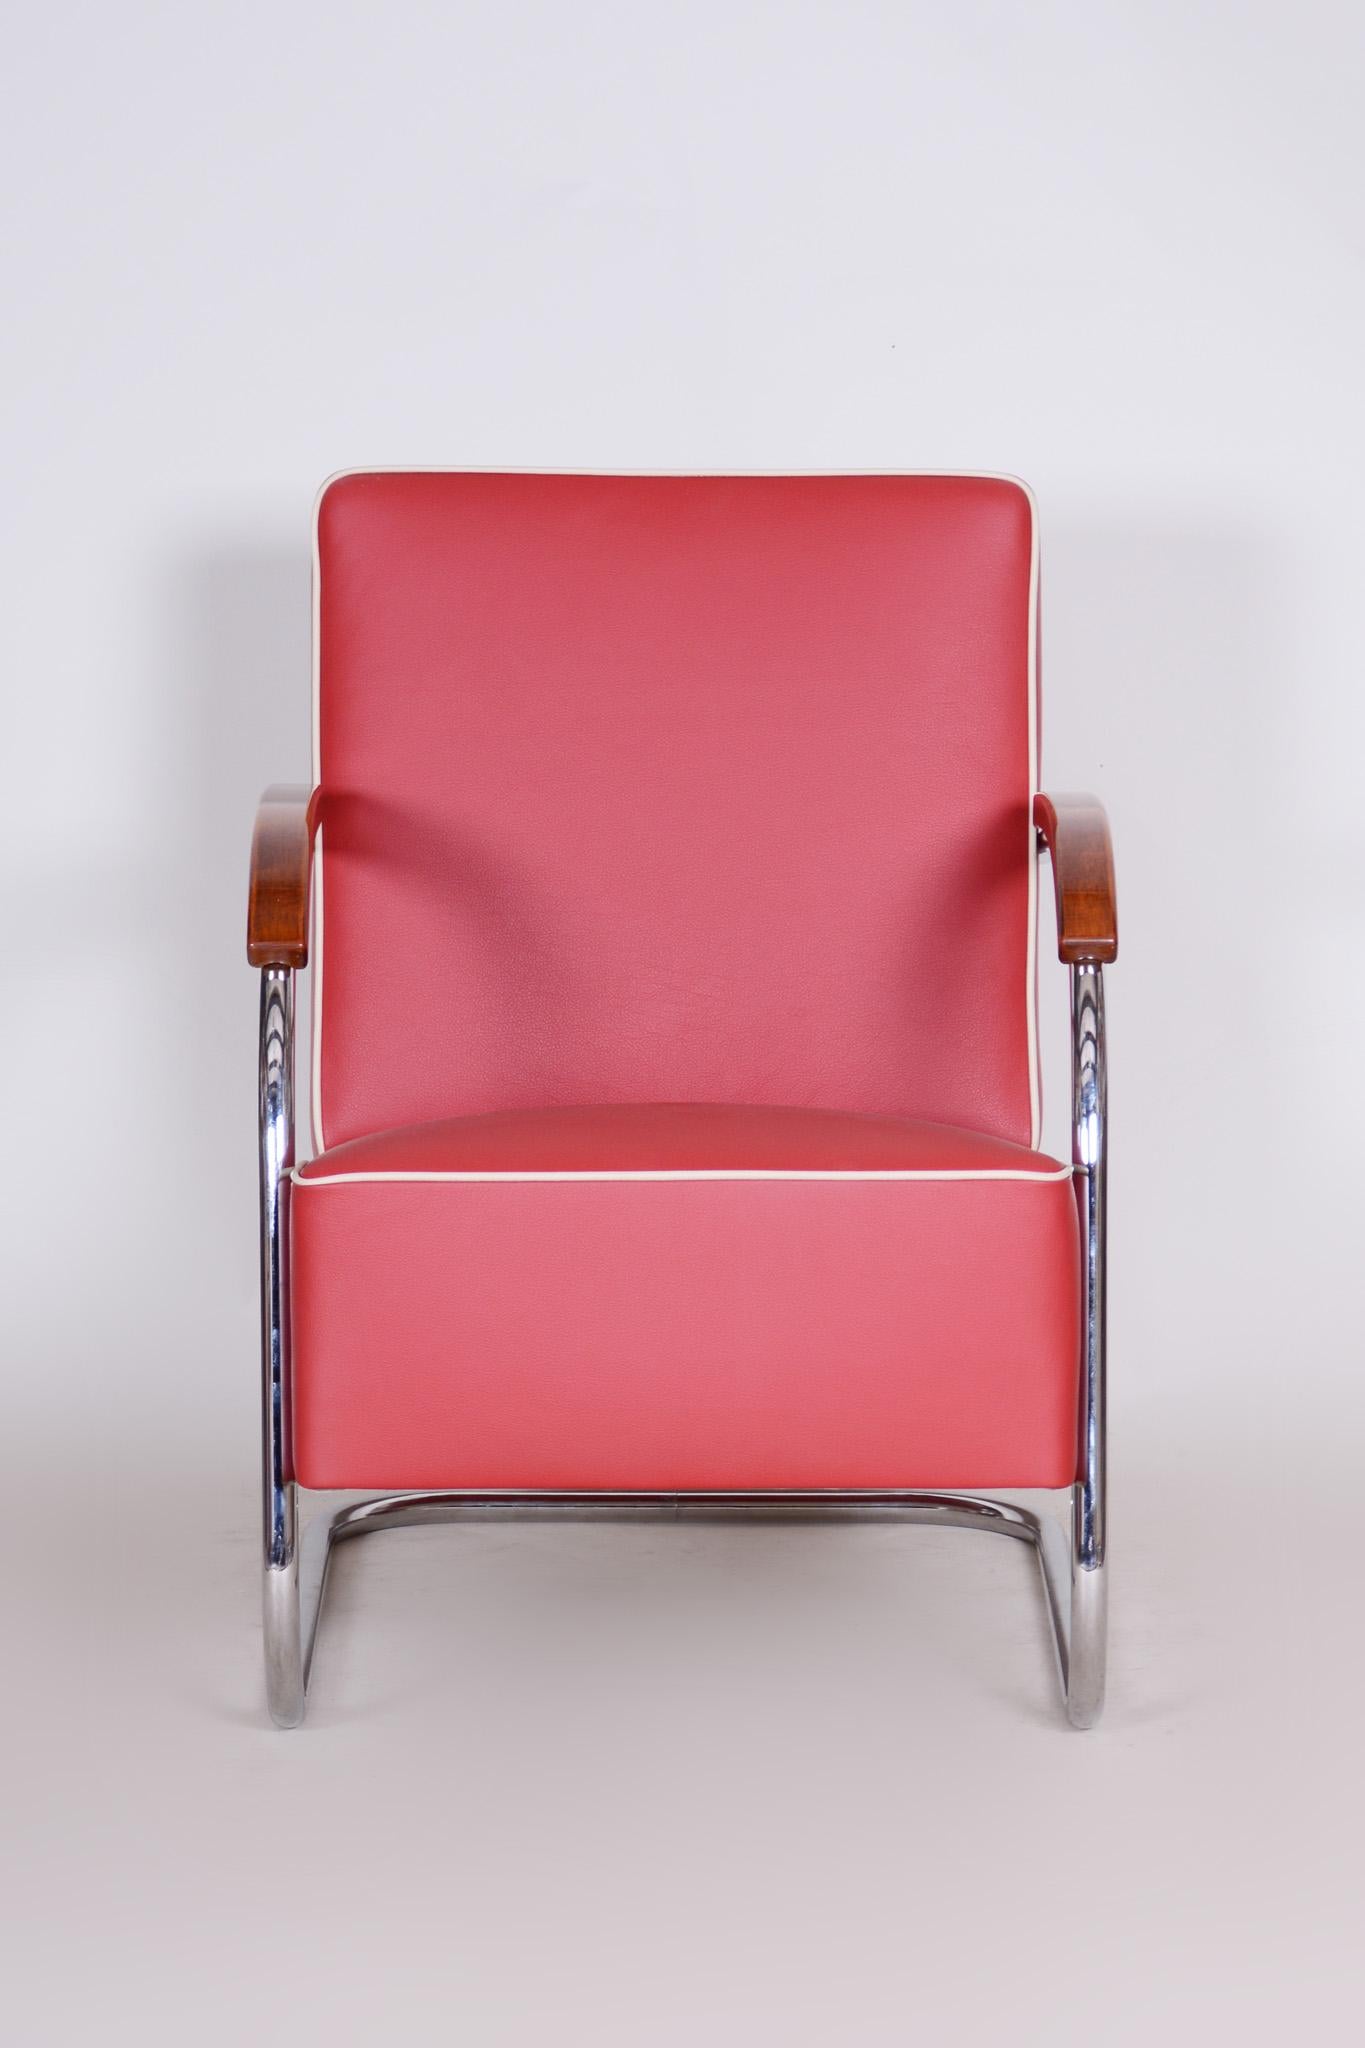 Red Tubular Steel Cantilever Chrome Armchair, High Quality Leather, 1930s In Good Condition For Sale In Horomerice, CZ